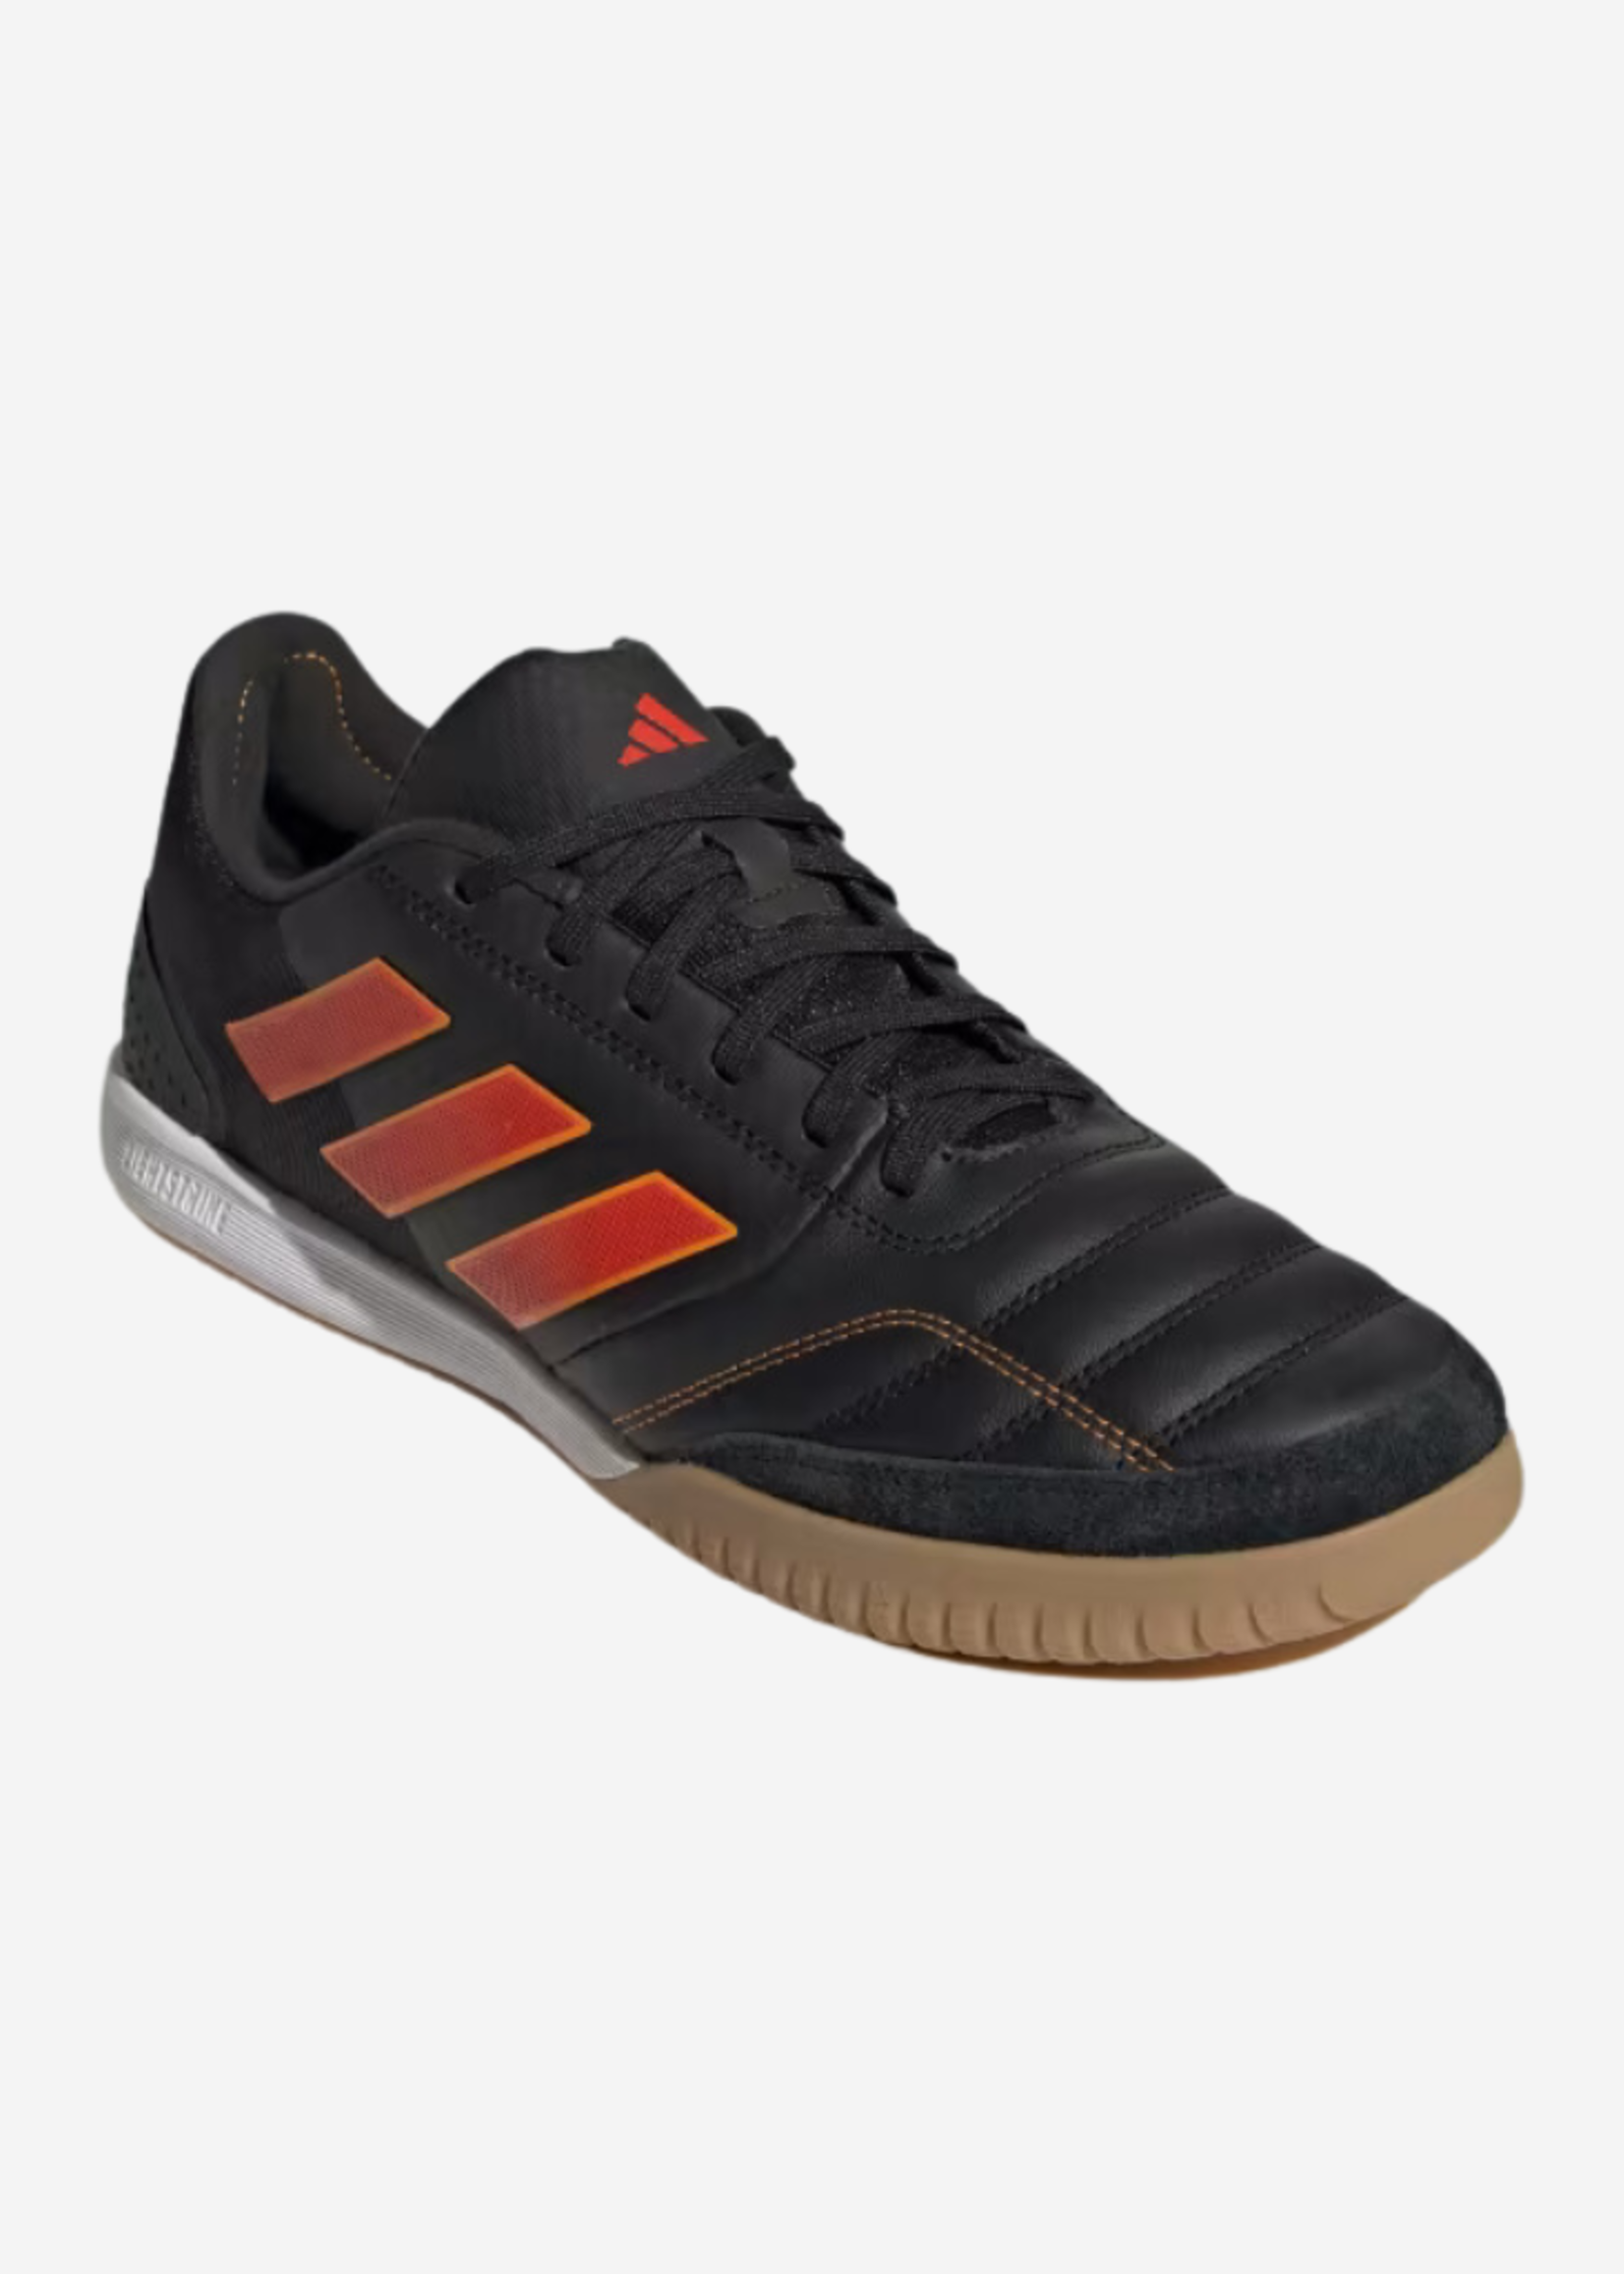 ADIDAS TOP SALA COMPETITIO BLACK IE1546 - Soccer Action